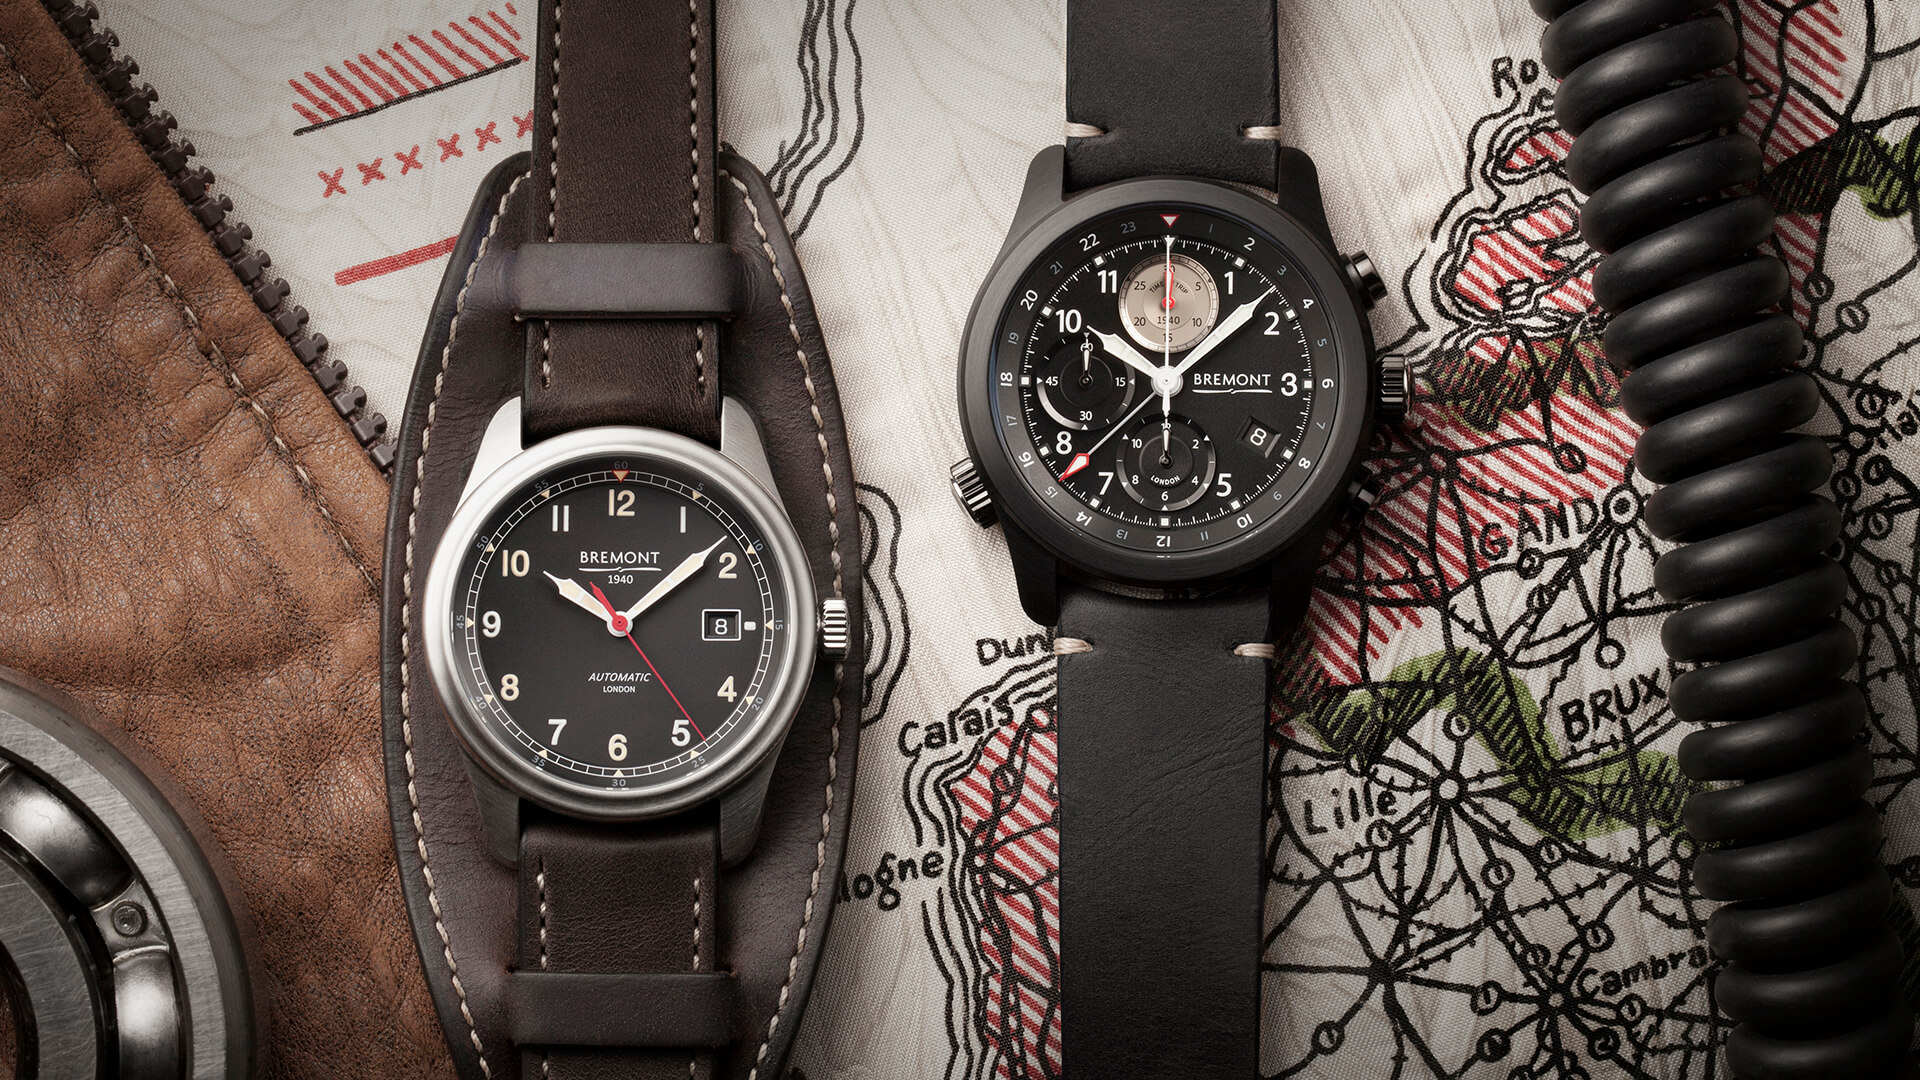 Bremont Celebrates The 80th Anniversary Of The Battle Of Britain With Limited Edition Battle Of Britain Collection Boxed Set